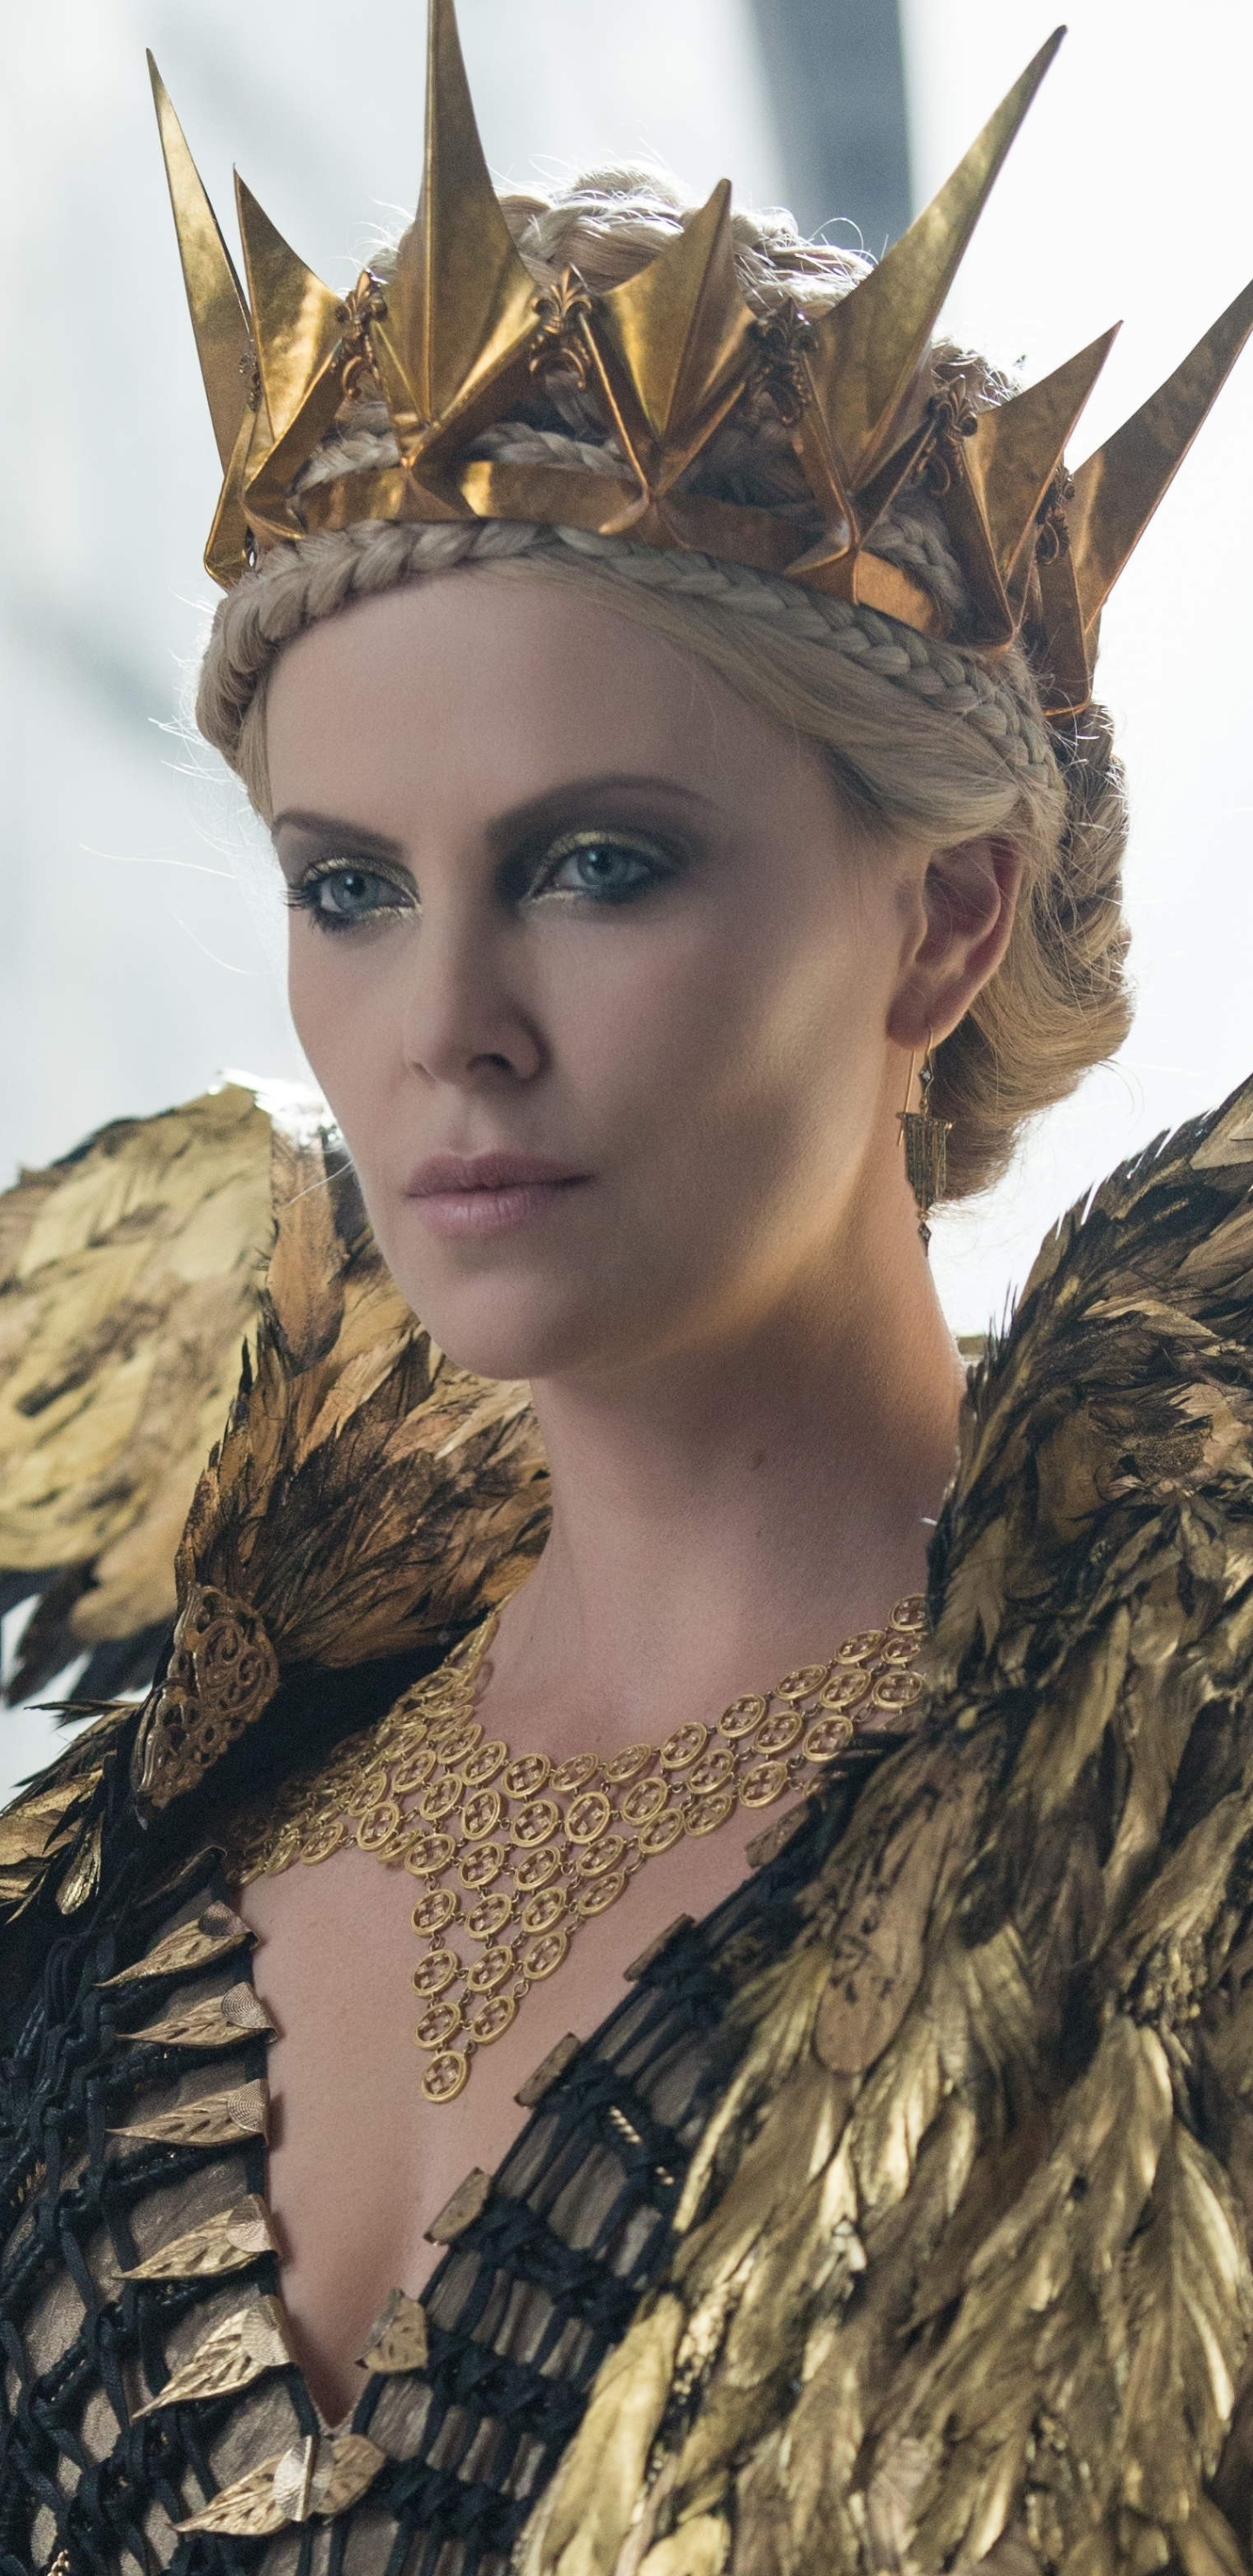 movie, the huntsman: winter's war, charlize theron lock screen backgrounds